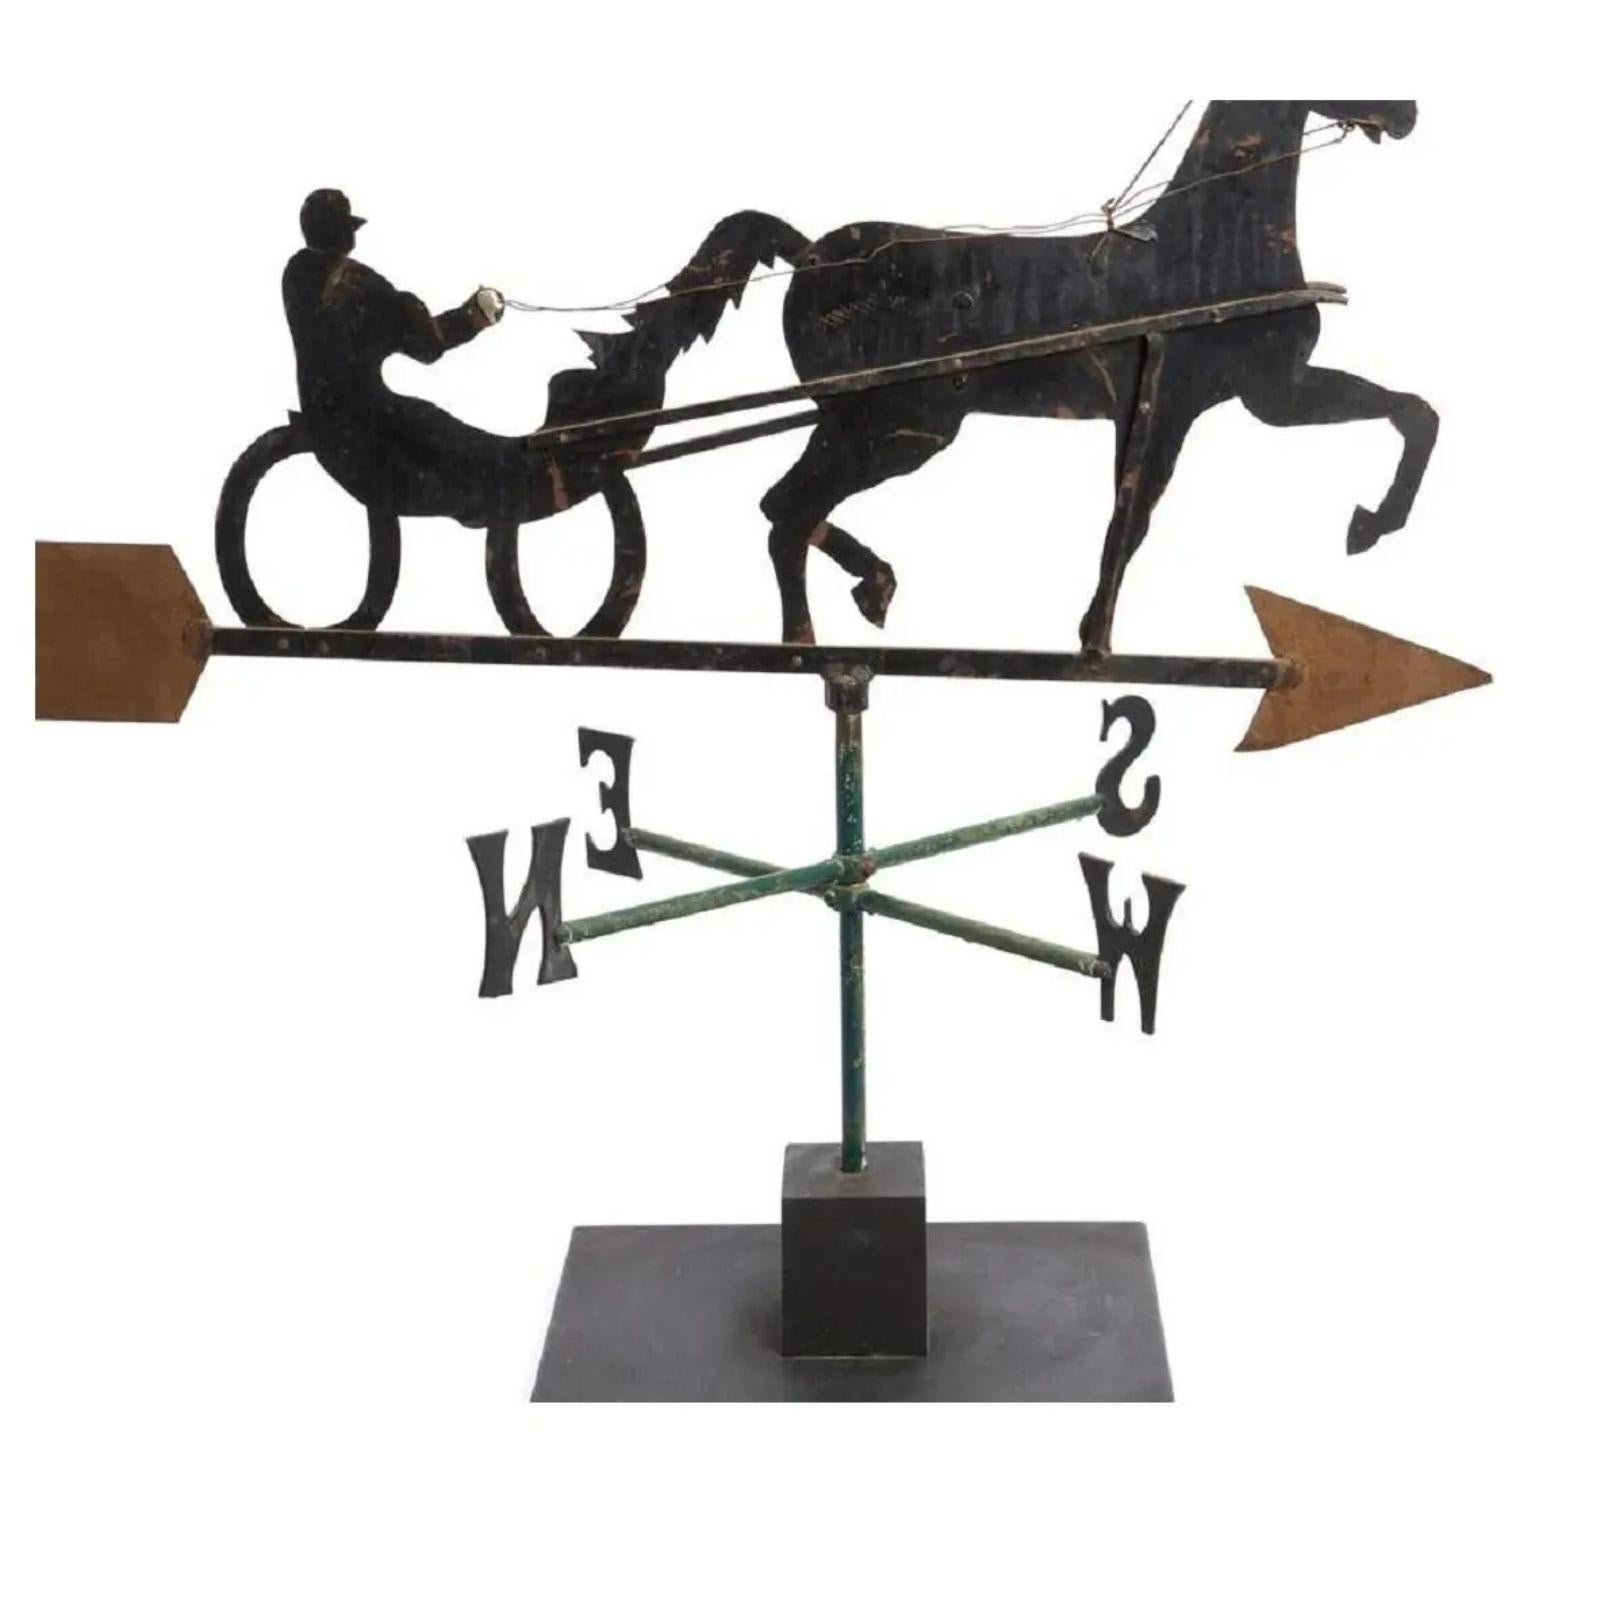 Vintage Sulky and Rider Folk Art Weather Vane

Additional information: 
Materials: Iron
Color: Black
Period: 1940s
Place of Origin: North America
Styles: Folk Art
Item Type: Vintage, Antique or Pre-owned
Dimensions: 27